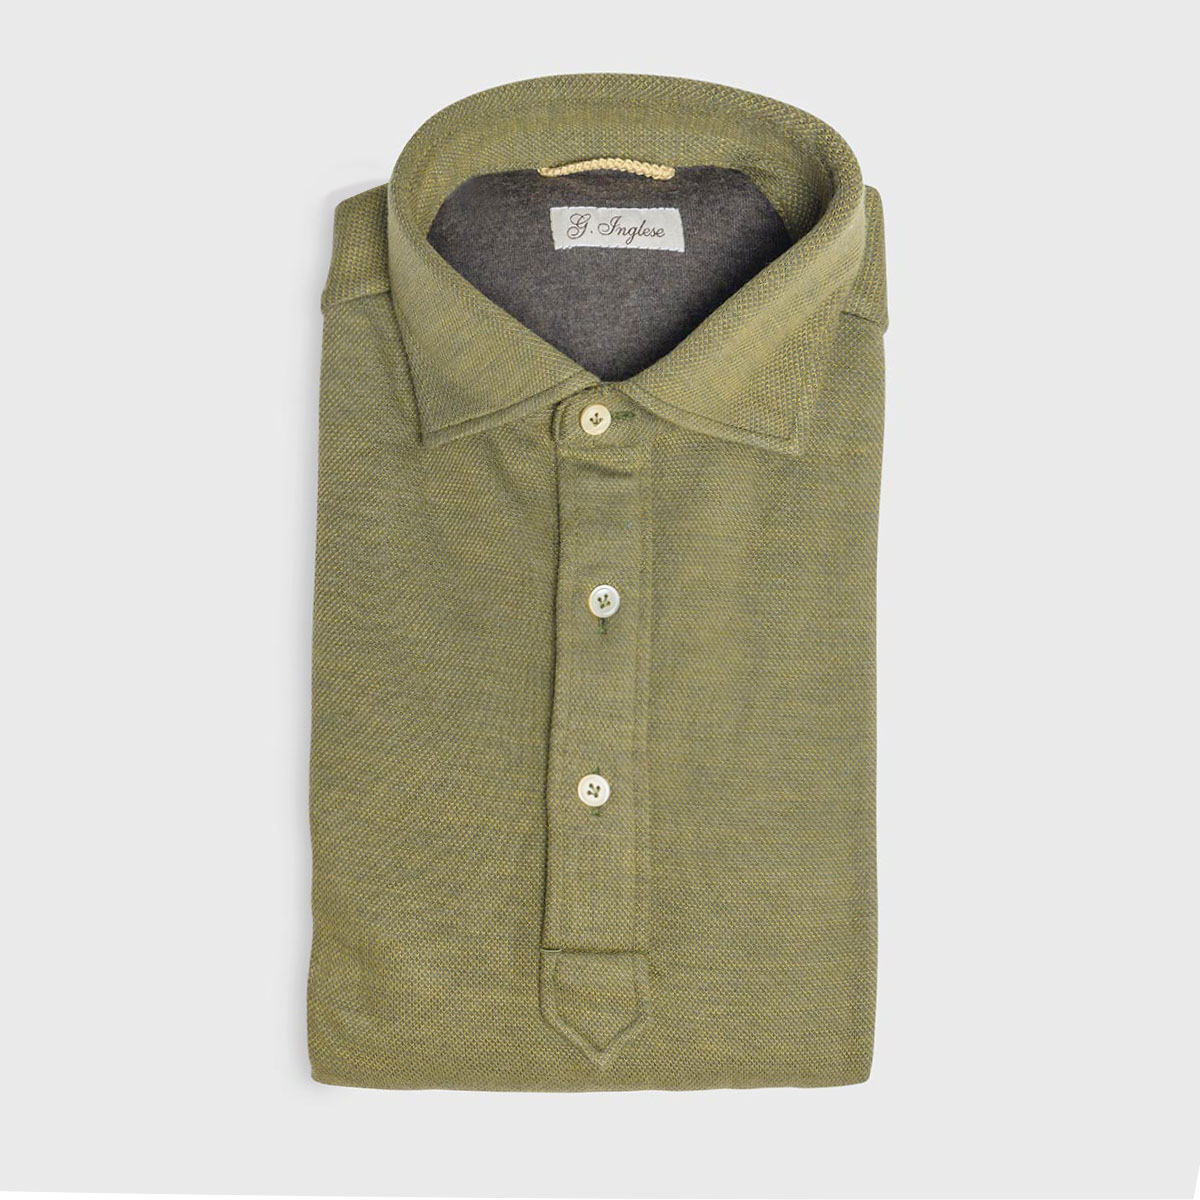 Jfk Green Cotton Piquet And Cashmere Polo Shirt G. Inglese on sale 2022